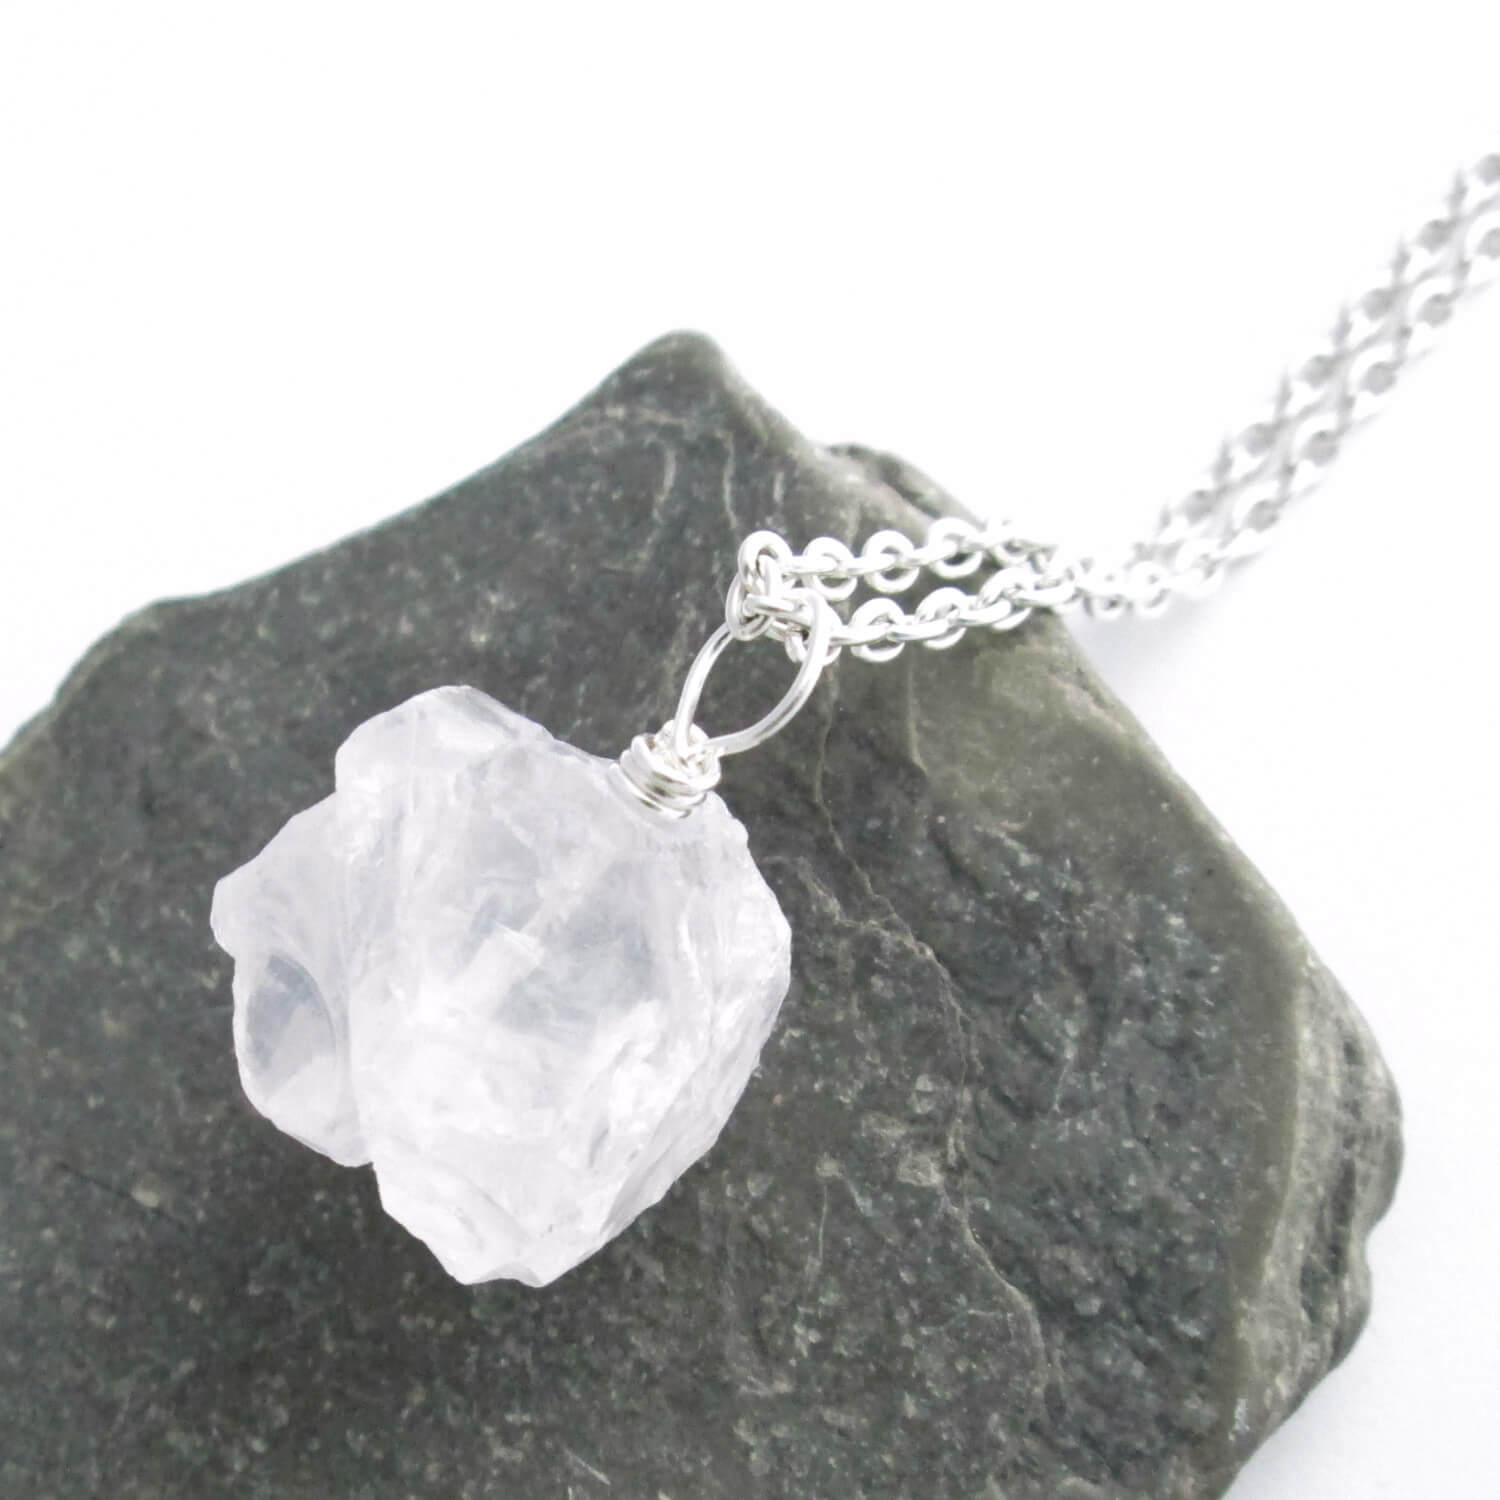 Large Rough Quartz Crystal on Leather Cord, Men's Necklace – LynnToddDesigns